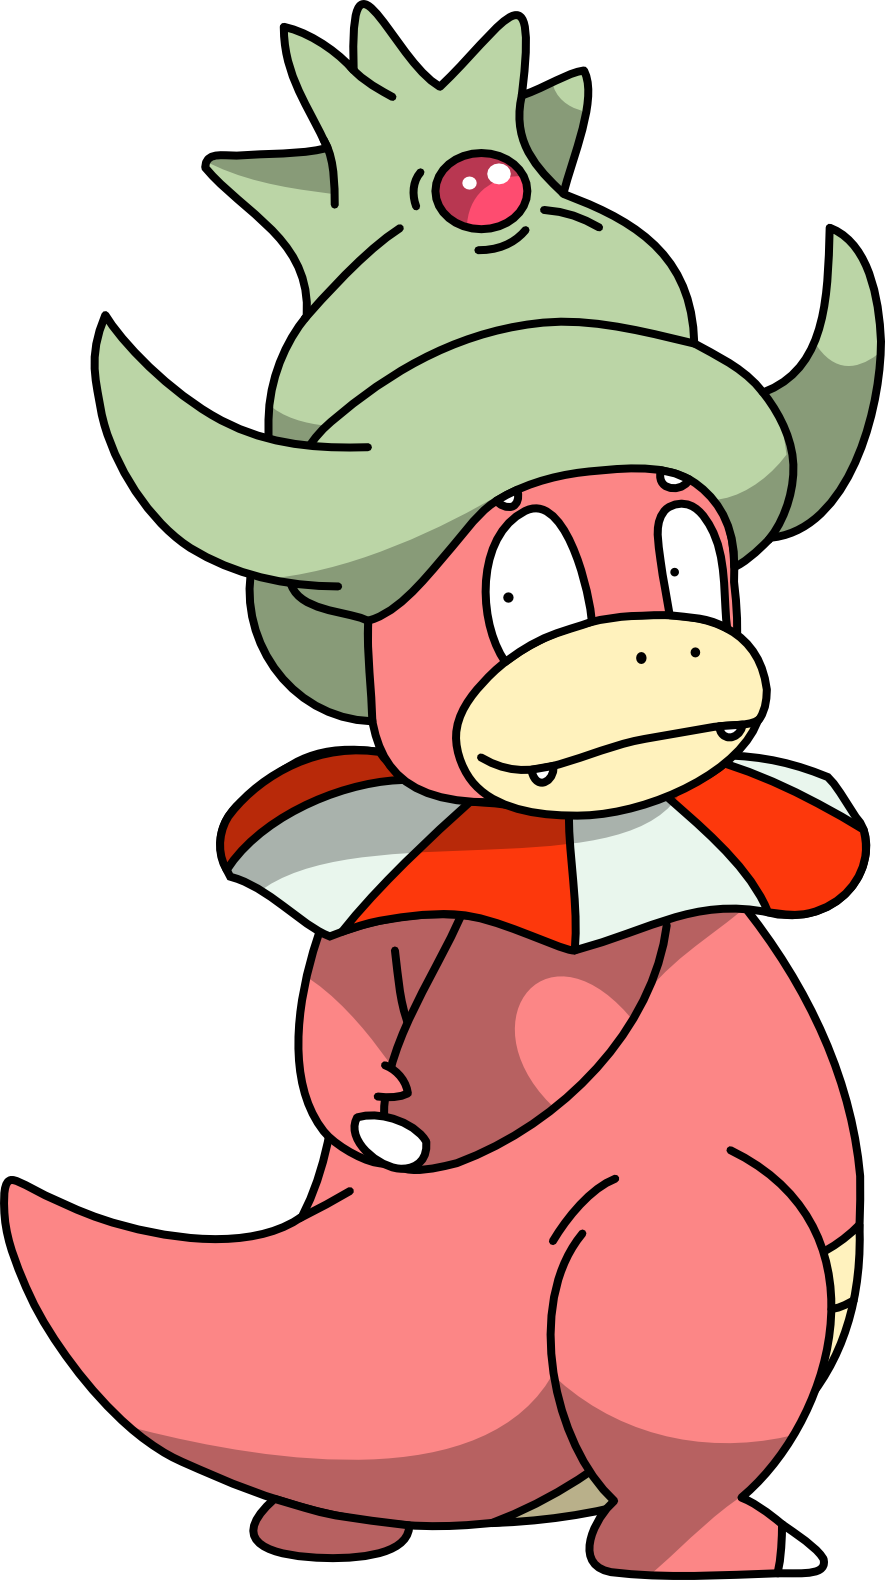 Slowking by Mighty355 on DeviantArt